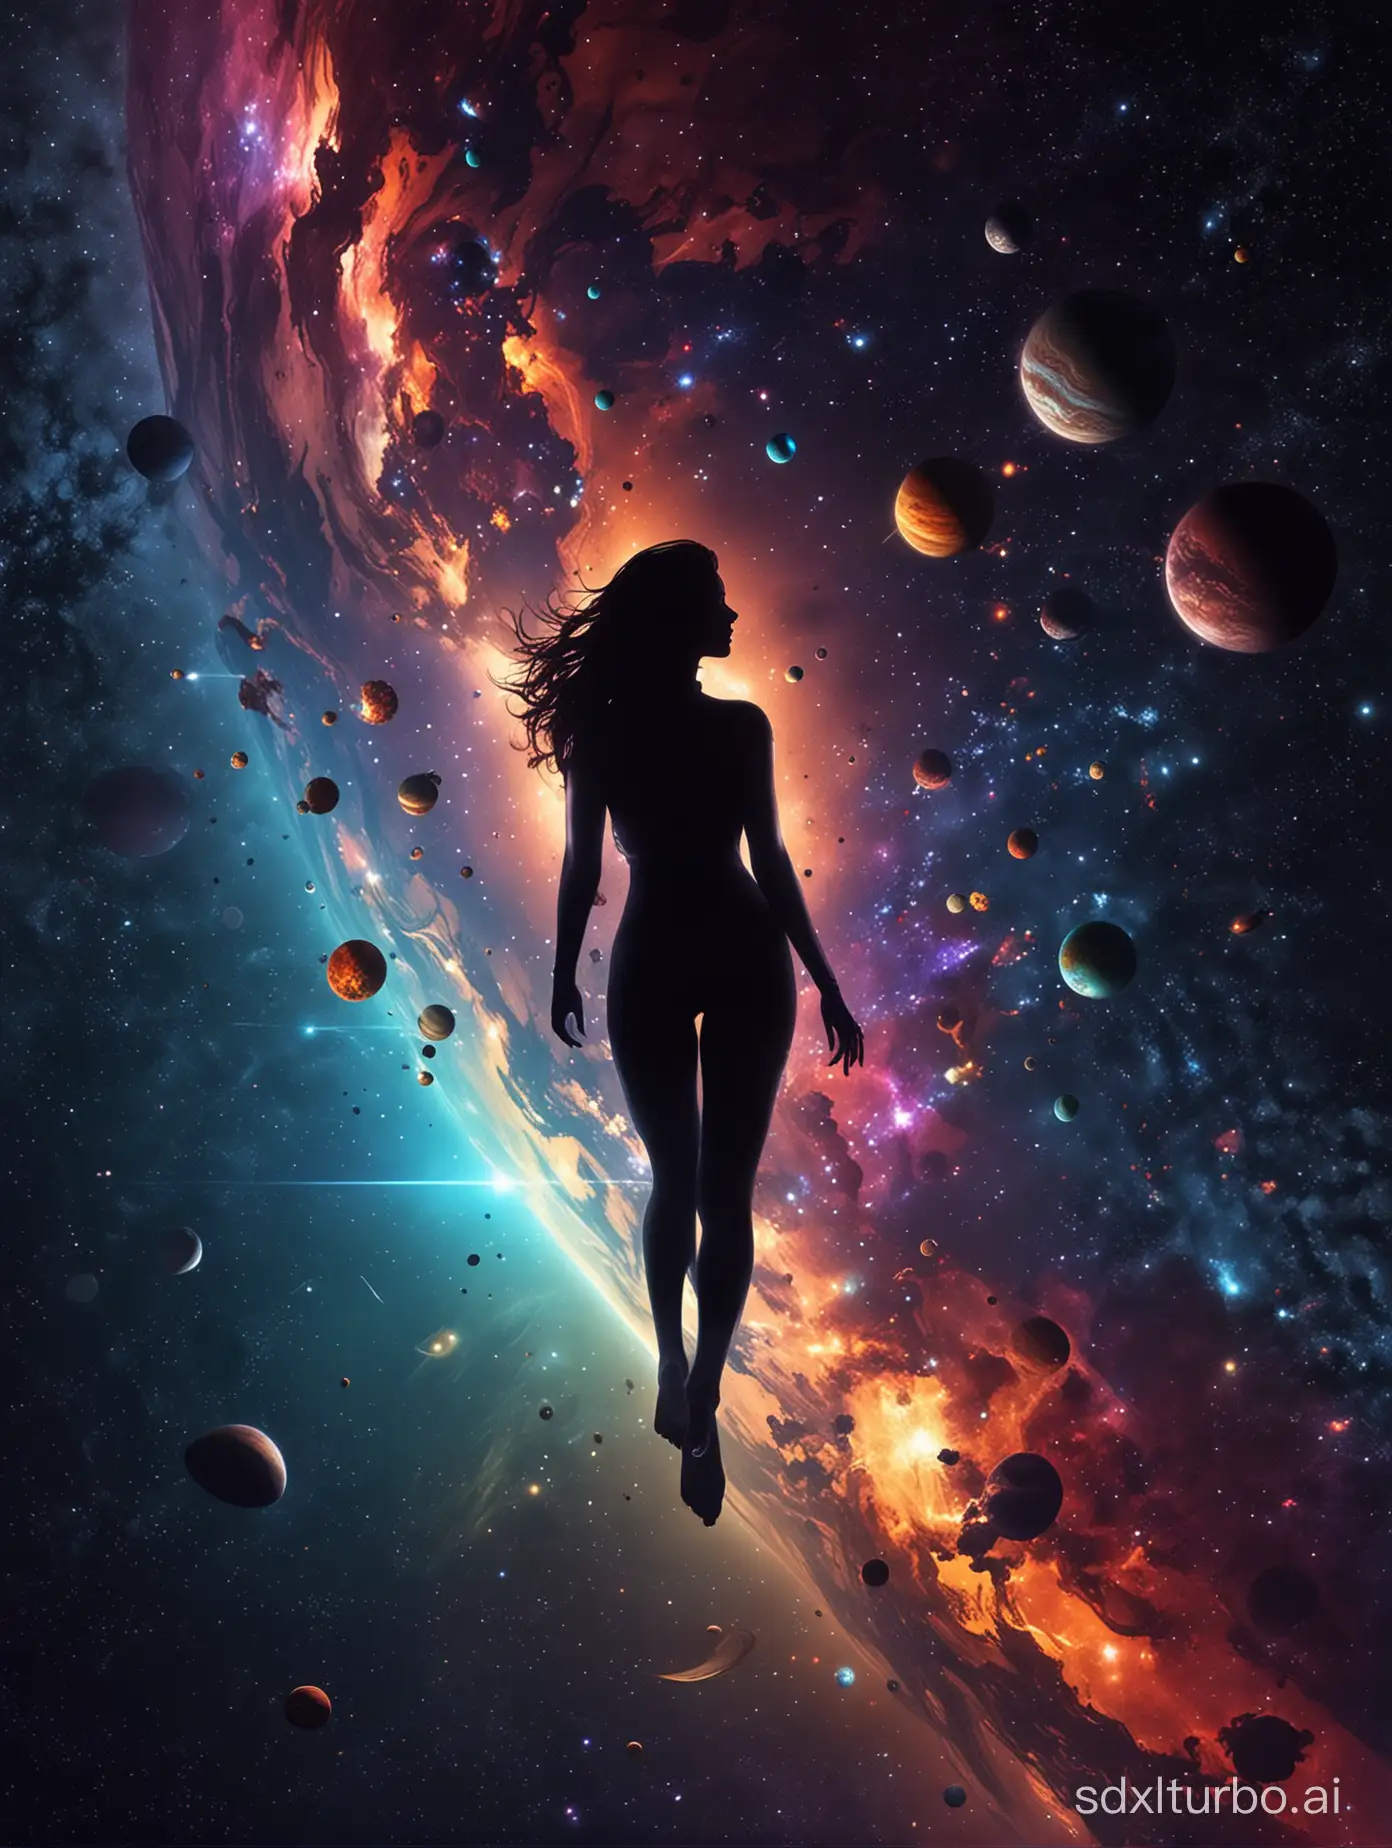 Stunning-Silhouette-of-a-Cosmic-Woman-Mesmerizing-Planetary-Beauty-in-Space